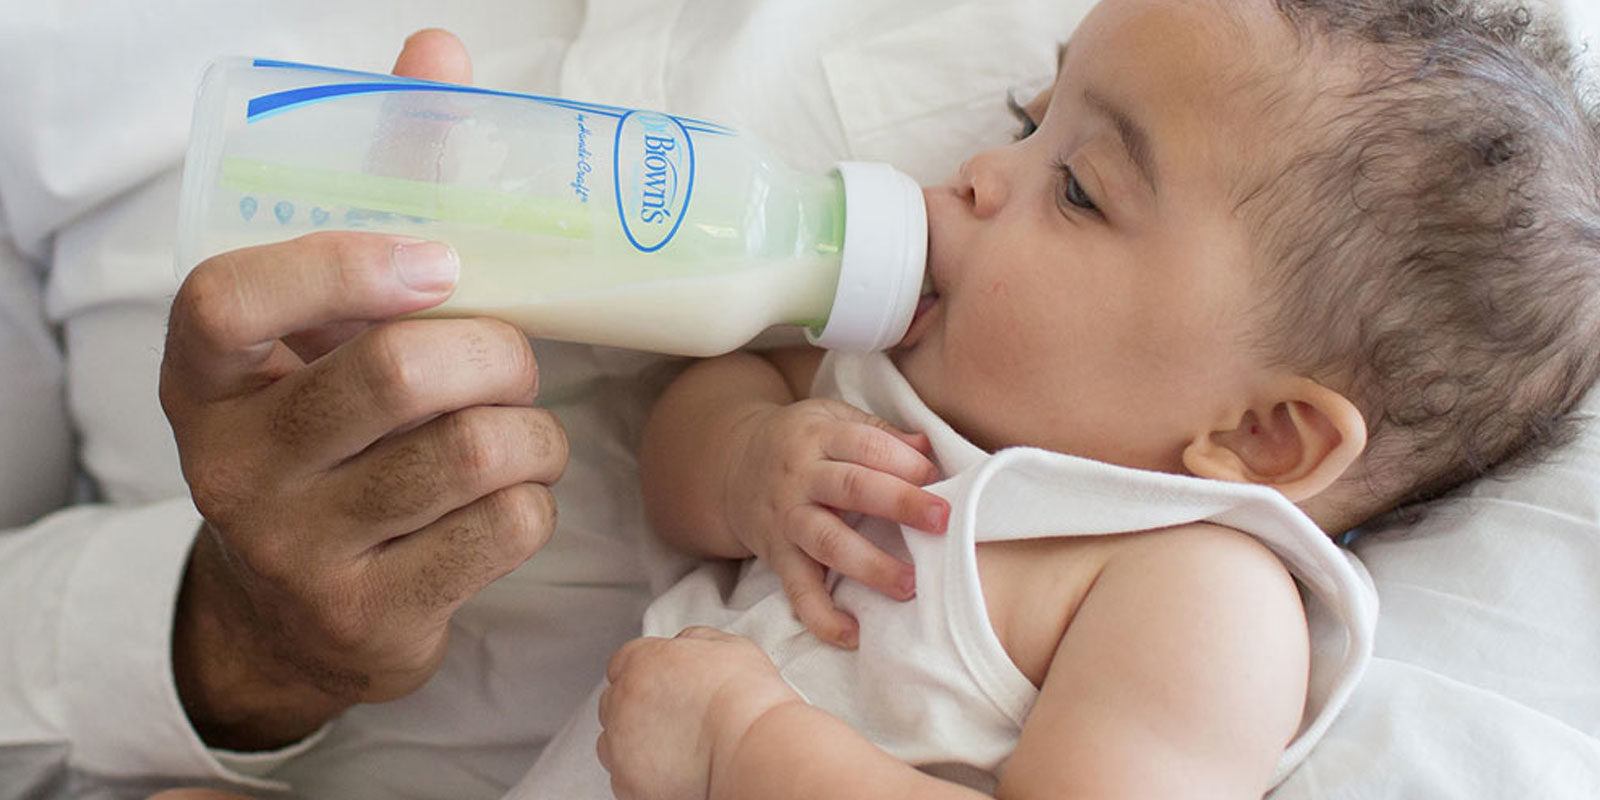 right way to feed baby from bottle